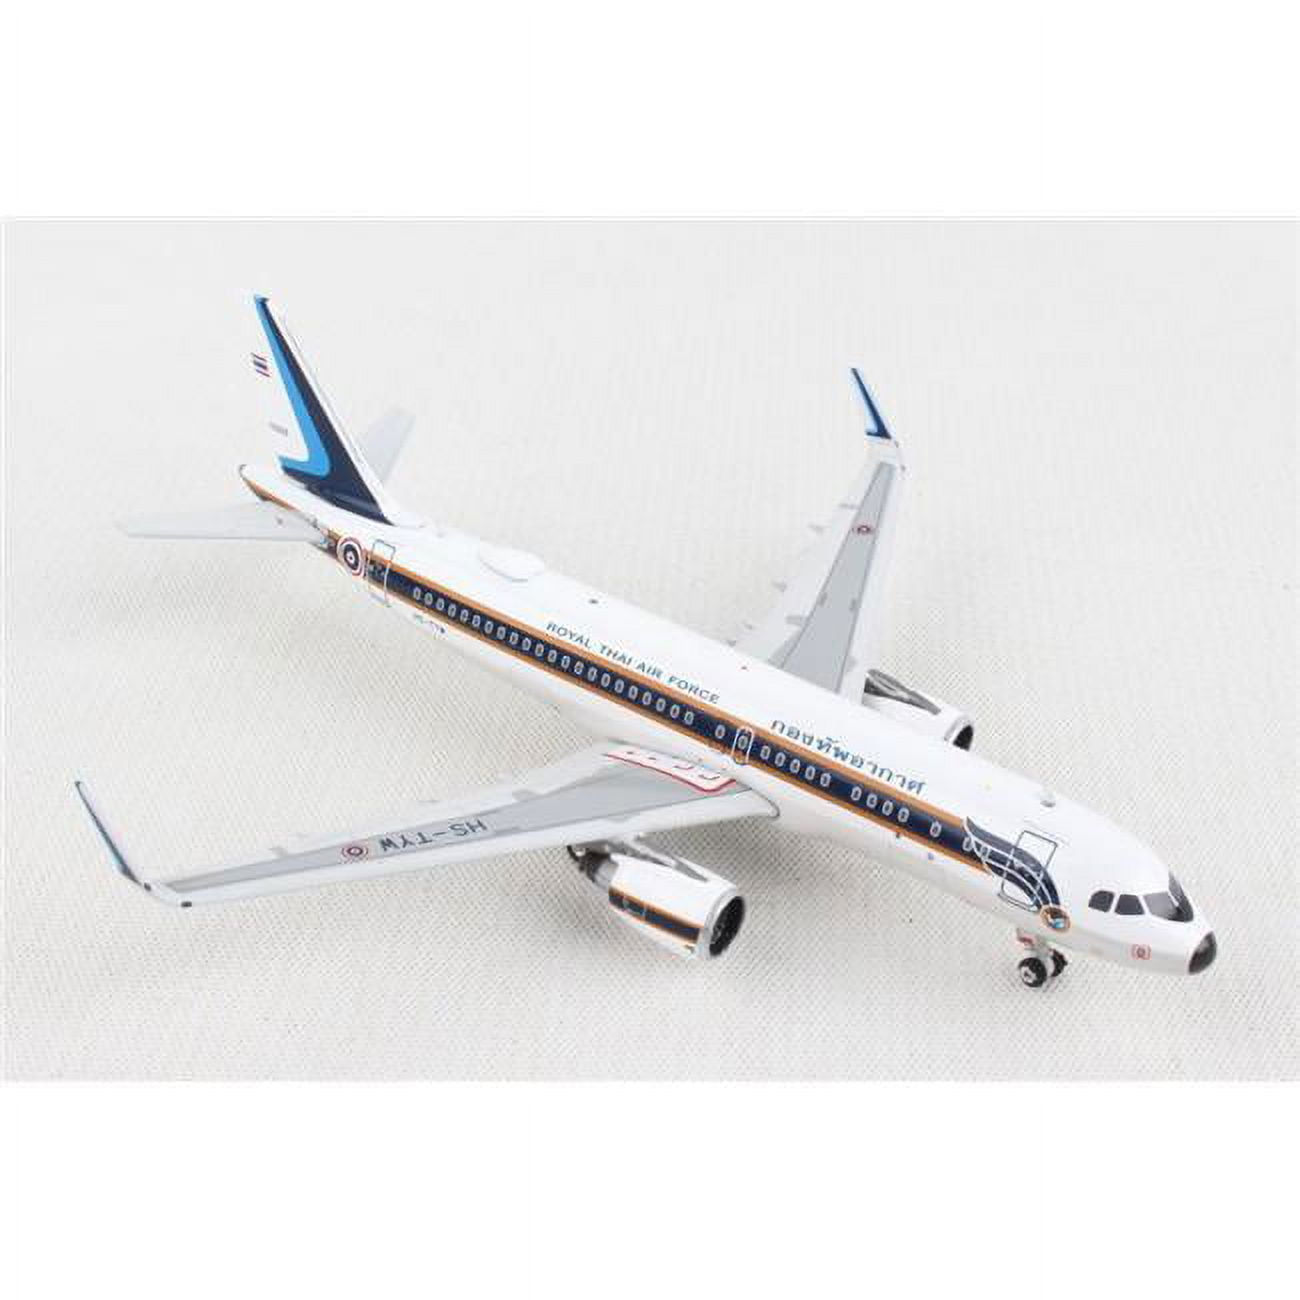 Picture of Phoenix Diecast PH2155 1-400 Scale No.Hs-Tyw Reg Royal Thai Air Force A320 Model Airplane